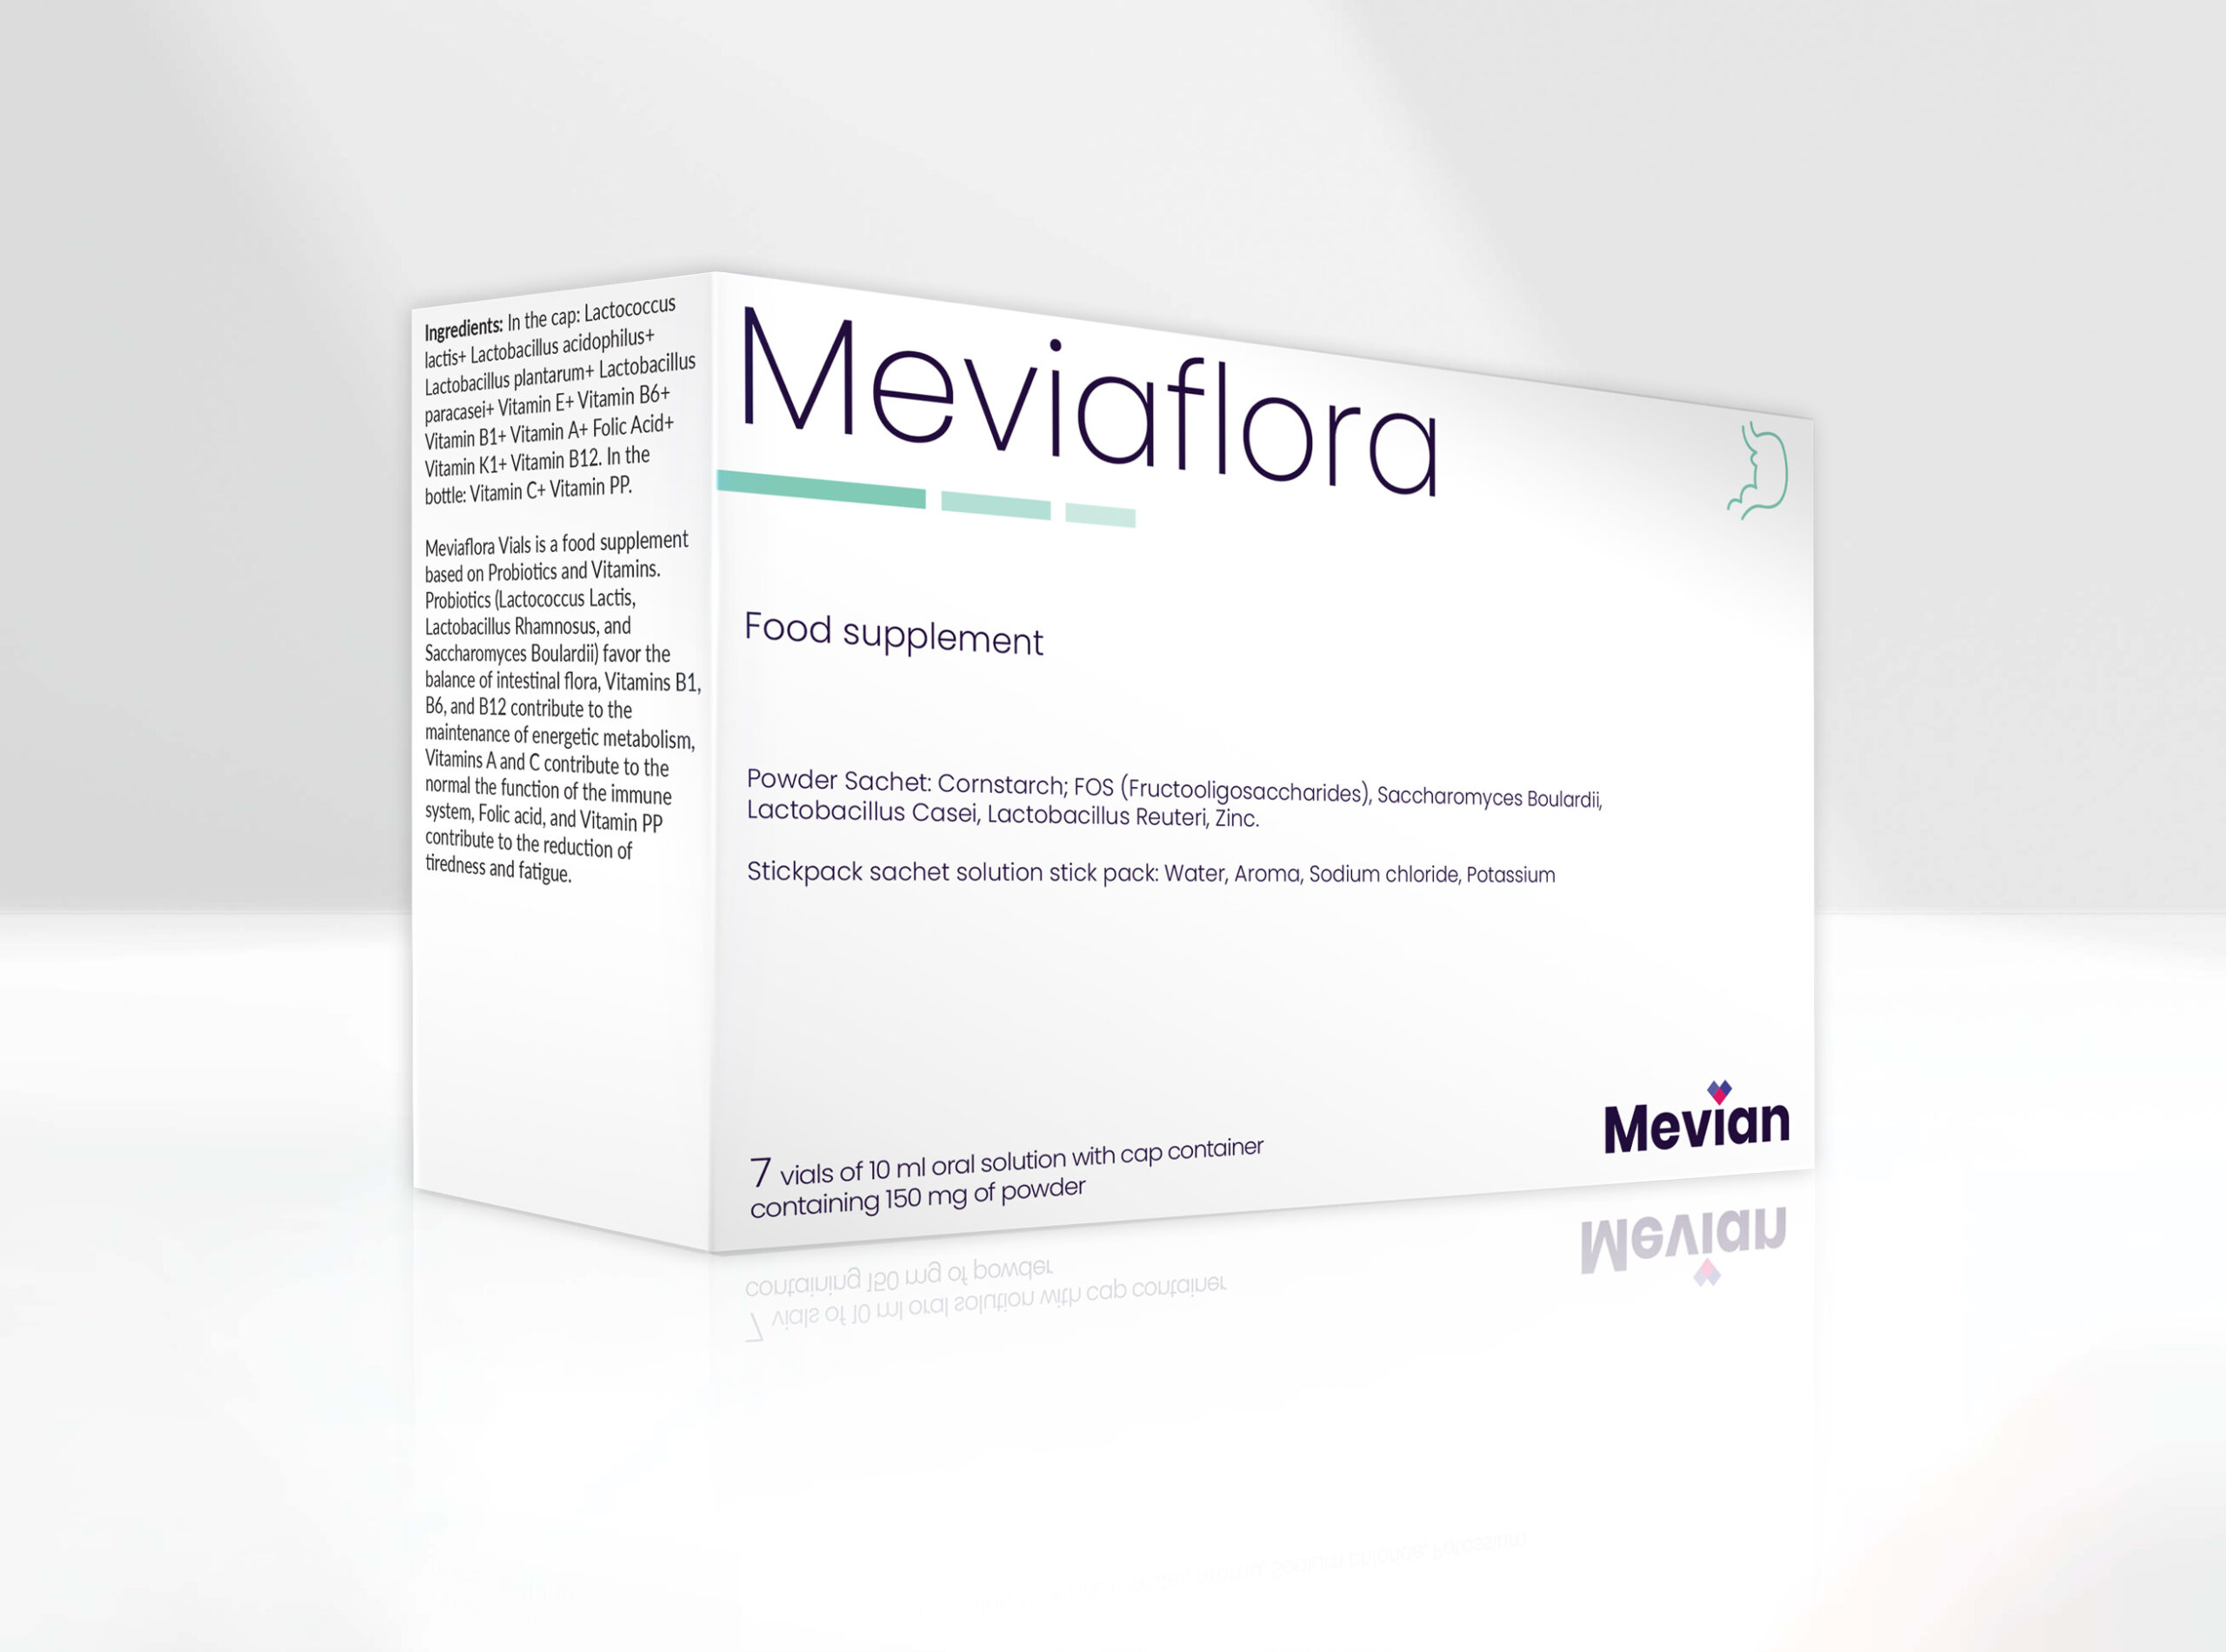 Meviaflora is a premium synergy of ingredients that balance intestinal flora, maintaining the energetic metabolism, and normal function of the immune system, while reducing tiredness and fatigue.